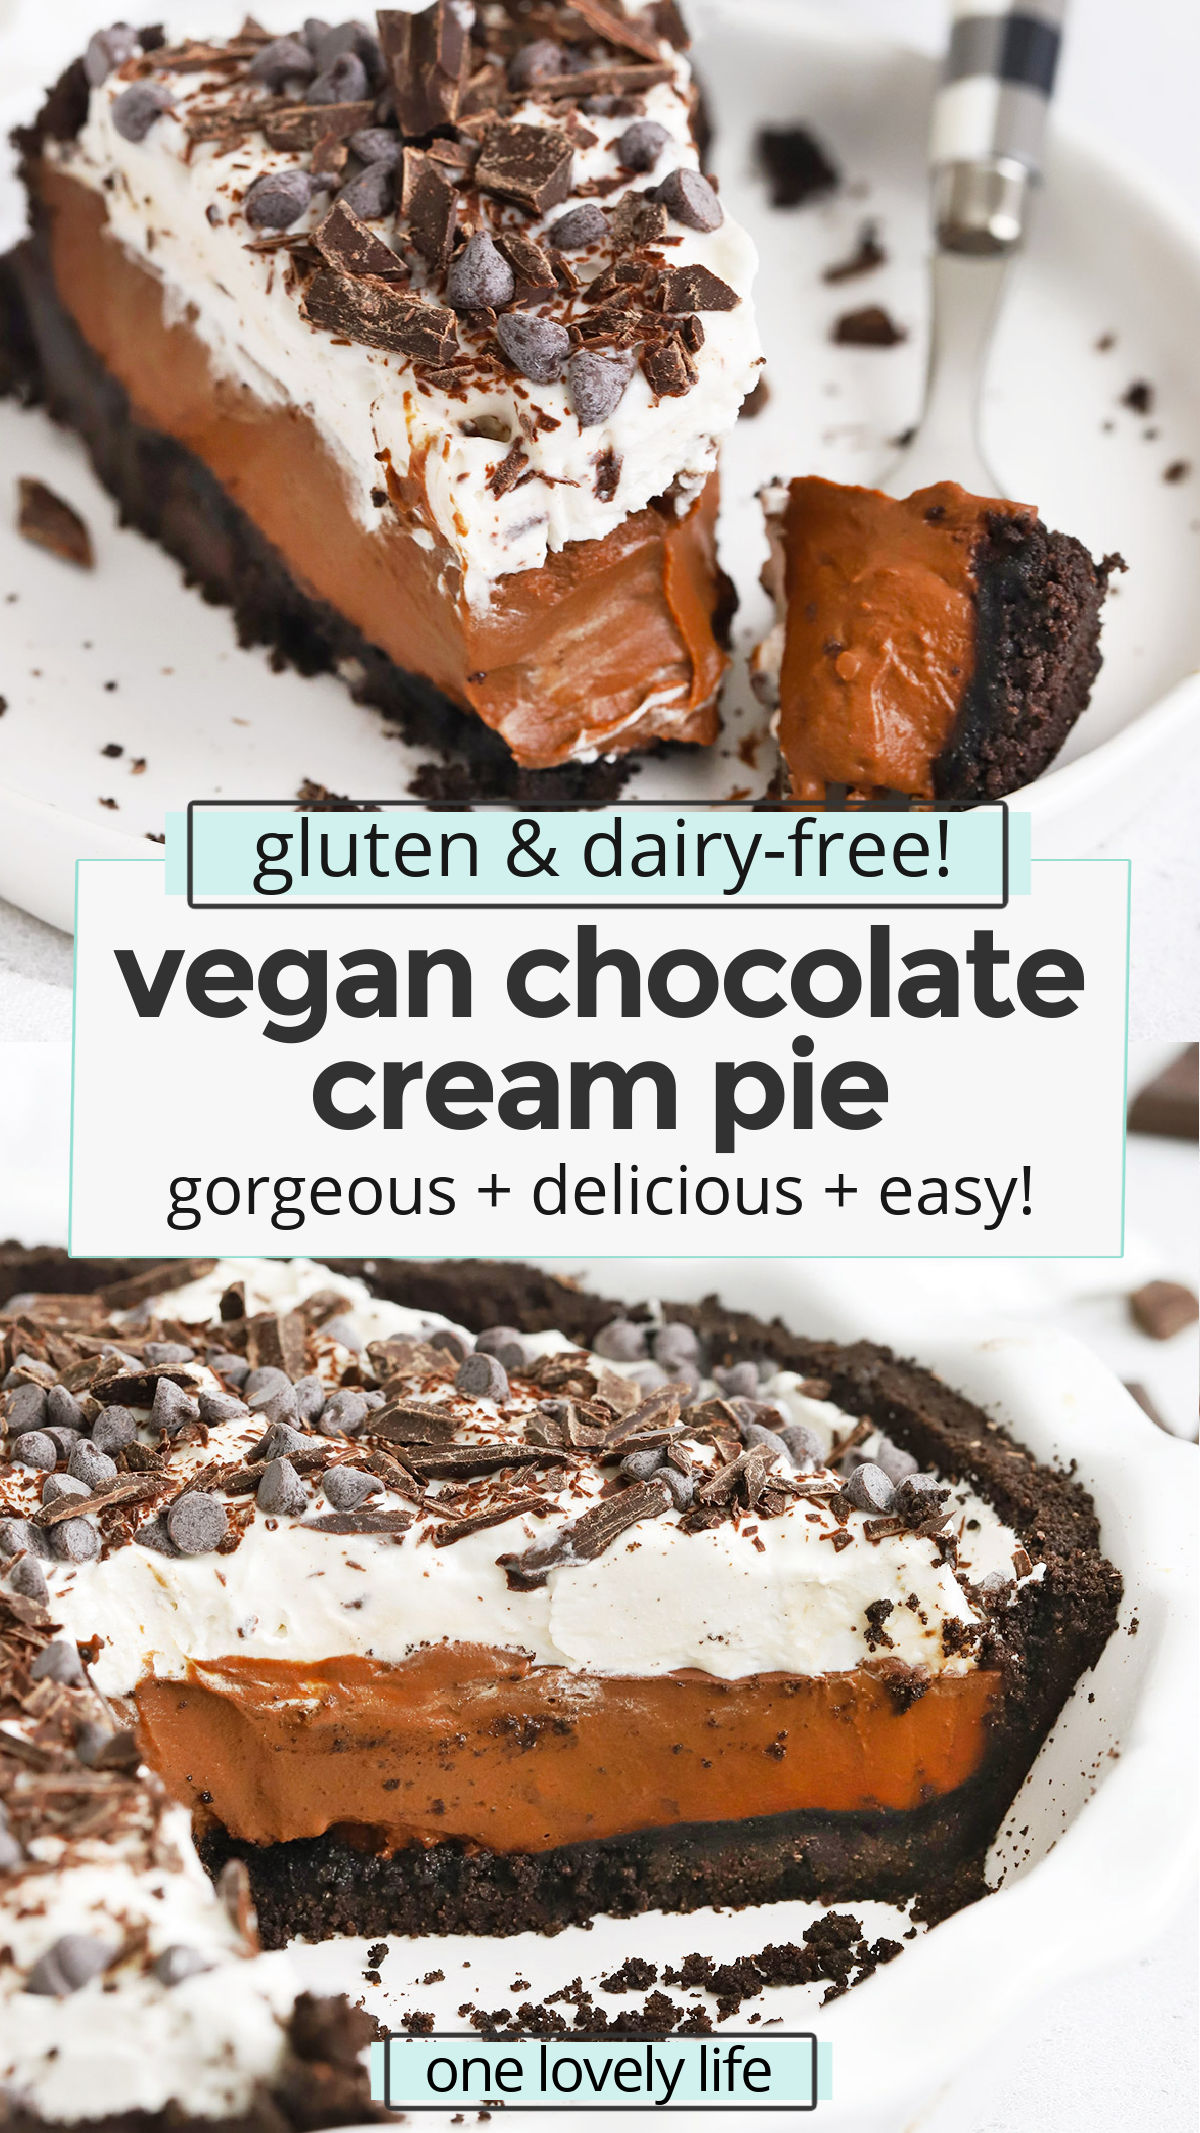 Vegan Chocolate Pie - This gorgeous dairy-free chocolate cream pie has a rich chocolatey filling and crispy chocolate cookie crust your whole family will flip for! (Gluten-Free, Dairy-Free) // Vegan Chocolate Pie // Dairy-Free Chocolate Pie // Vegan Chocolate Pudding Pie // Dairy-Free Chocolate cream pie // Dairy Free Chocolate Pie / Vegan Pie Recipe / Vegan Pudding Pie recipe